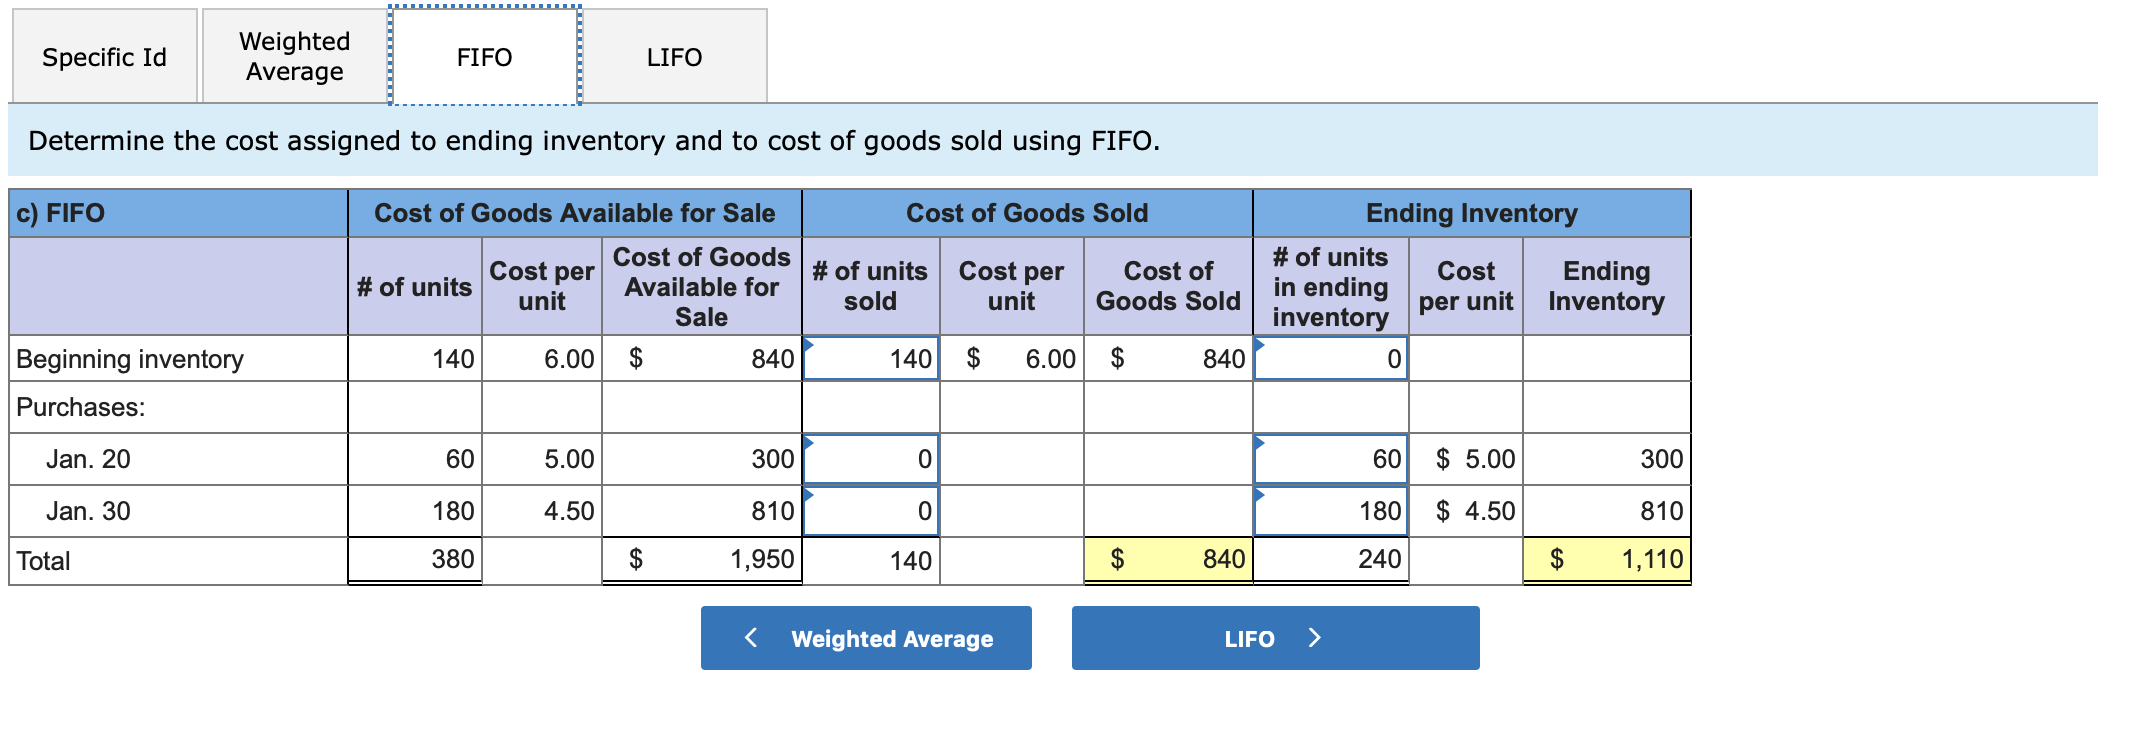 Weighted
Average
Specific Id
LIFO
FIFO
Determine the cost assigned to ending inventory and to cost of goods sold using FIFO.
c) FIFO
Ending Inventory
Cost of Goods Available for Sale
Cost of Goods Sold
Cost of Goods#of units
# of units
#of units Cost per
unit
Cost per
Cost of
Goods Sold
Ending
per unit Inventory
Cost
in ending
Available for
sold
unit
Sale
inventory
6.00 $
Beginning inventory
140 $
$
6.00
140
840
840
Purchases:
5.00
Jan. 20
60
5.00
300
60
300
4.50
Jan. 30
180
810
180
810
4.50
380
$
1,110
1,950
840
240
Total
140
$
$
Weighted Average
LIFO
EA
